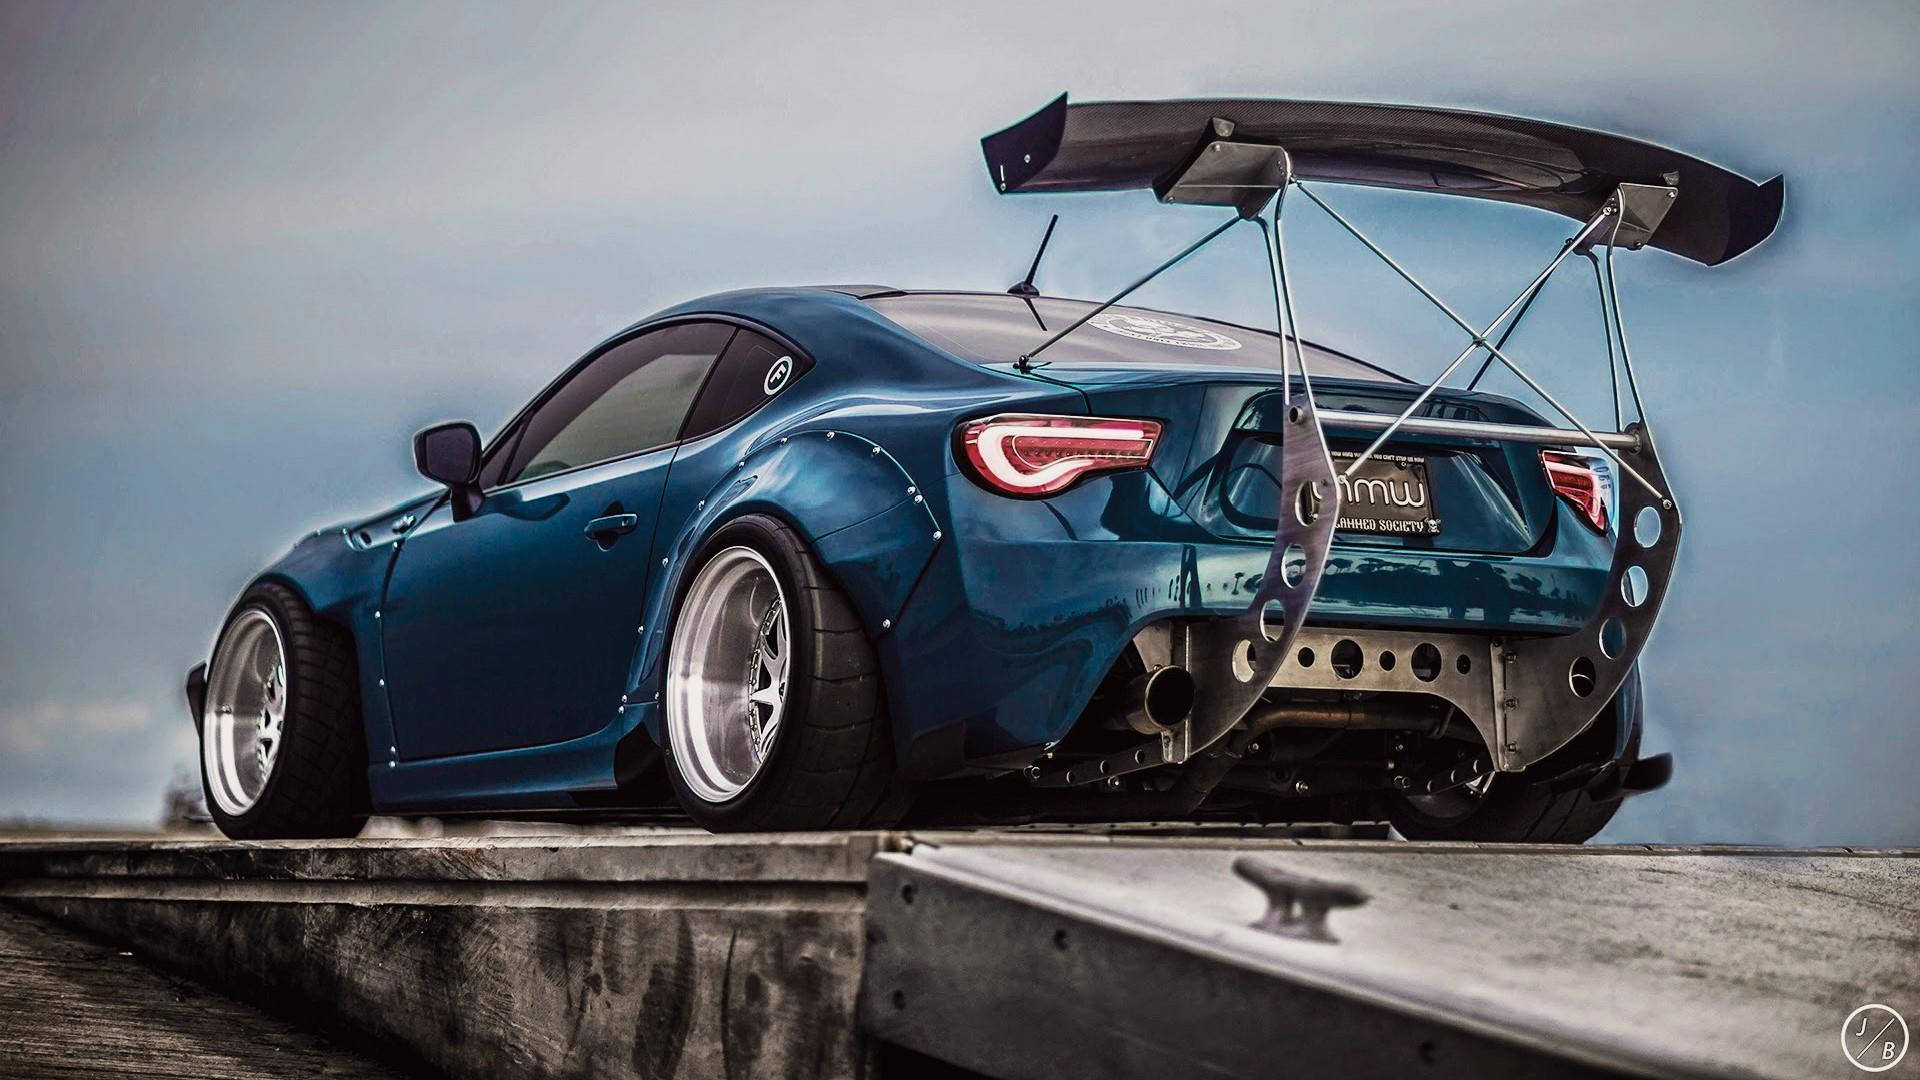 Go further with the Subaru BRZ Wallpaper